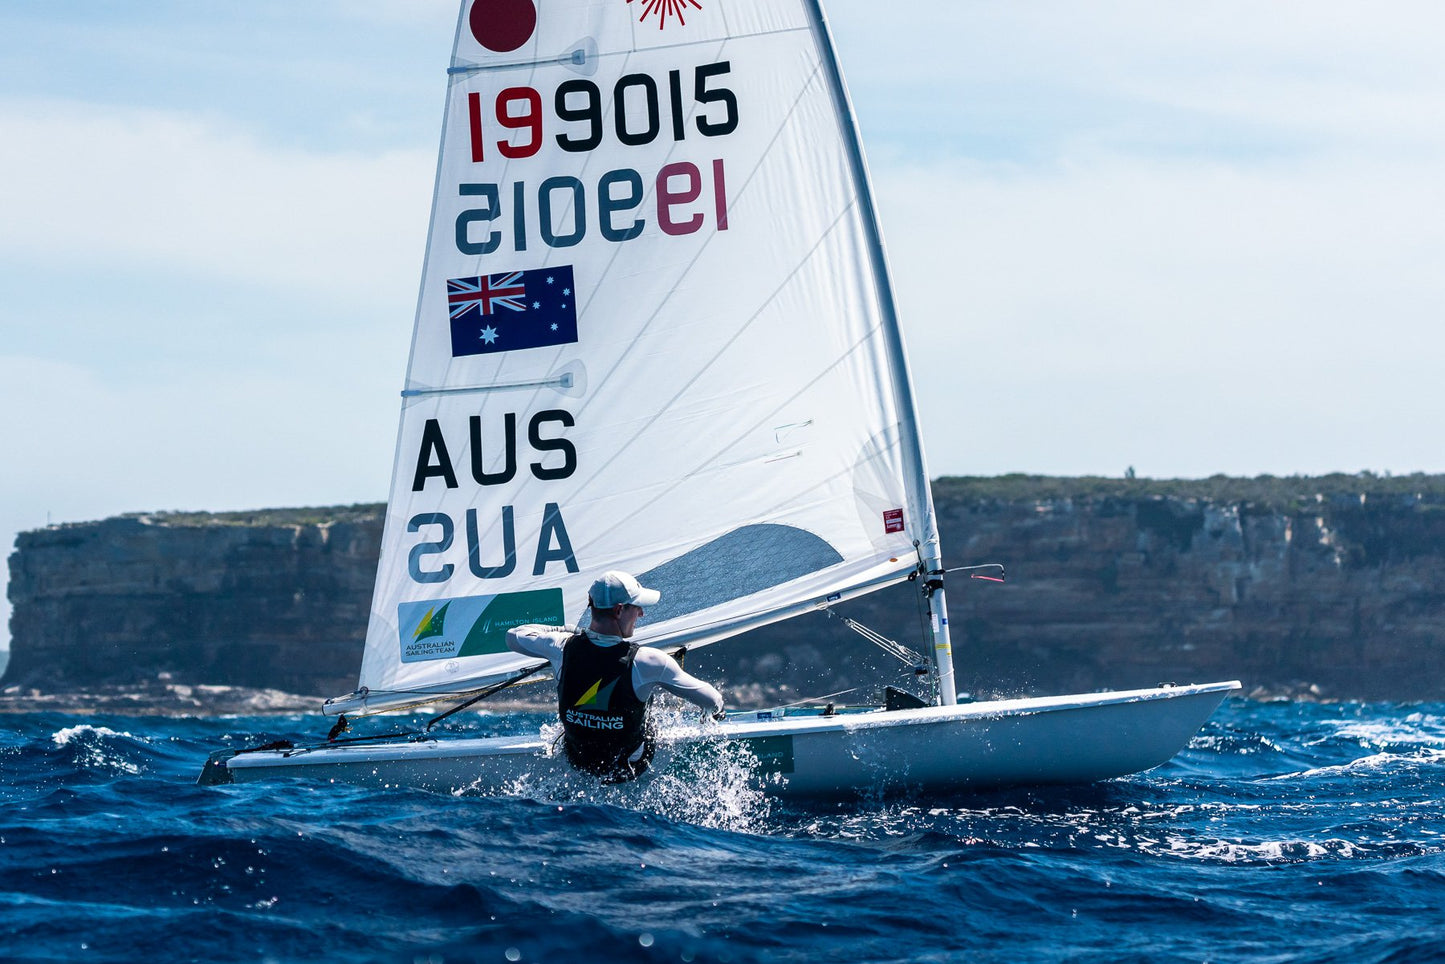 Nutricare and Australian Sailing Partner to Ensure Sailing’s Sustainability